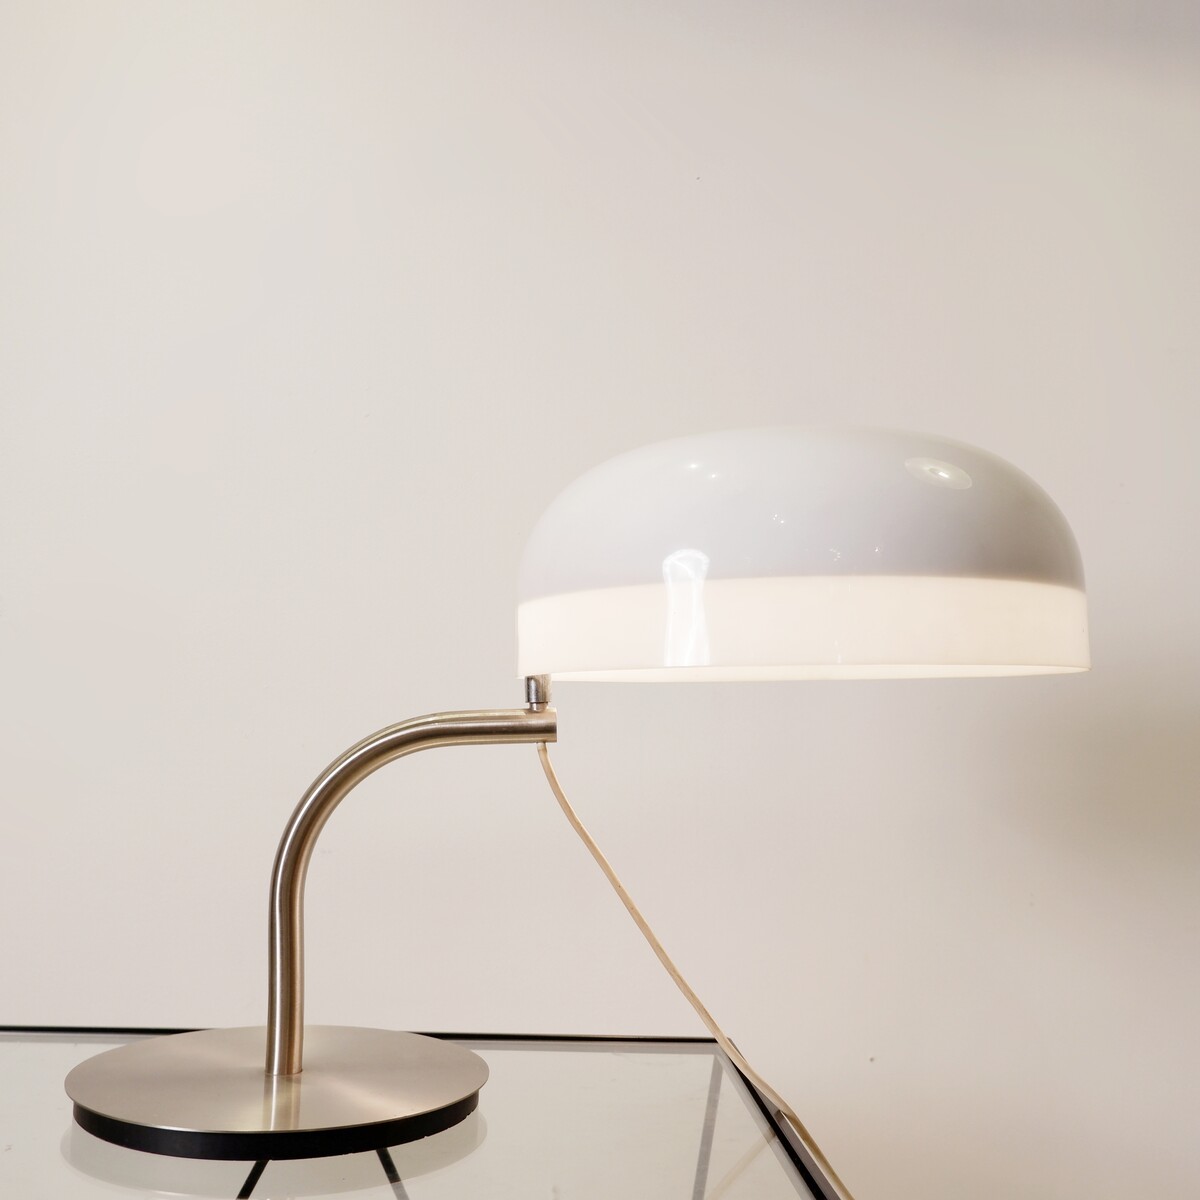 Giotto Stoppino, Italian vintage table lamp from the 1970s